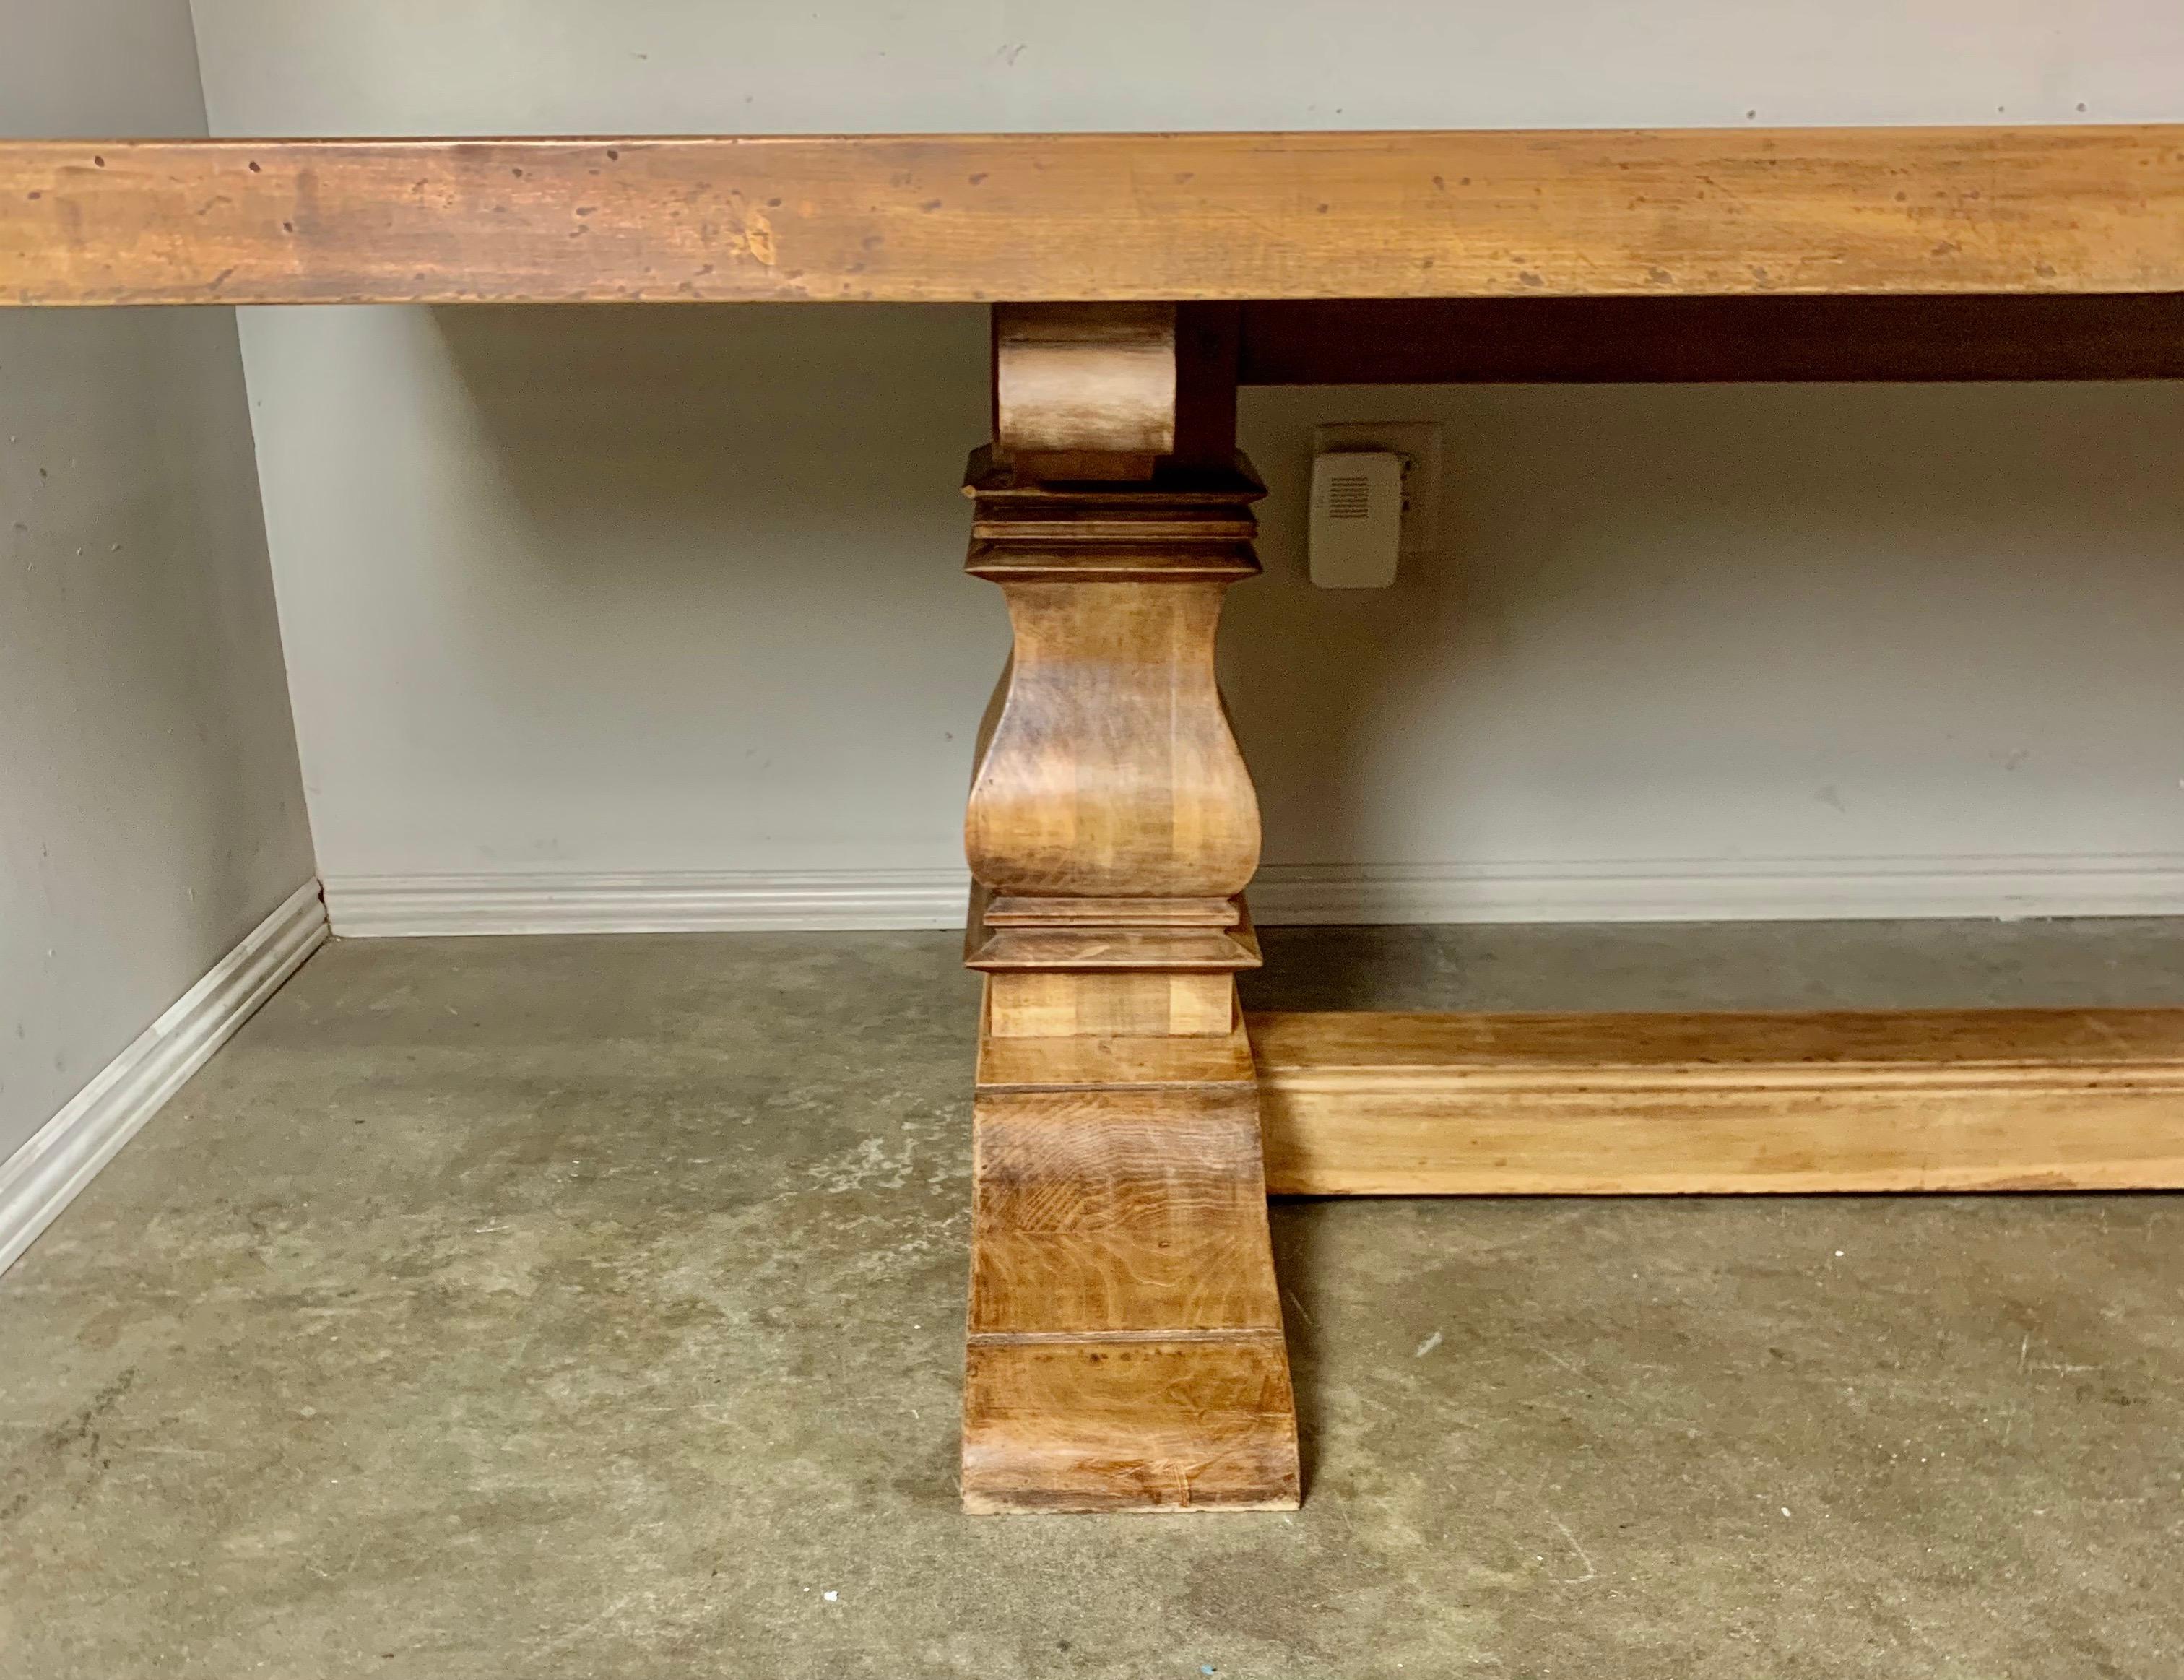 Italian midcentury walnut Italian trestle dining table. A large rectangular top sits on a pair of pedestal bases connected by a center stretcher. Beautiful natural walnut finish. Measure: 10'.